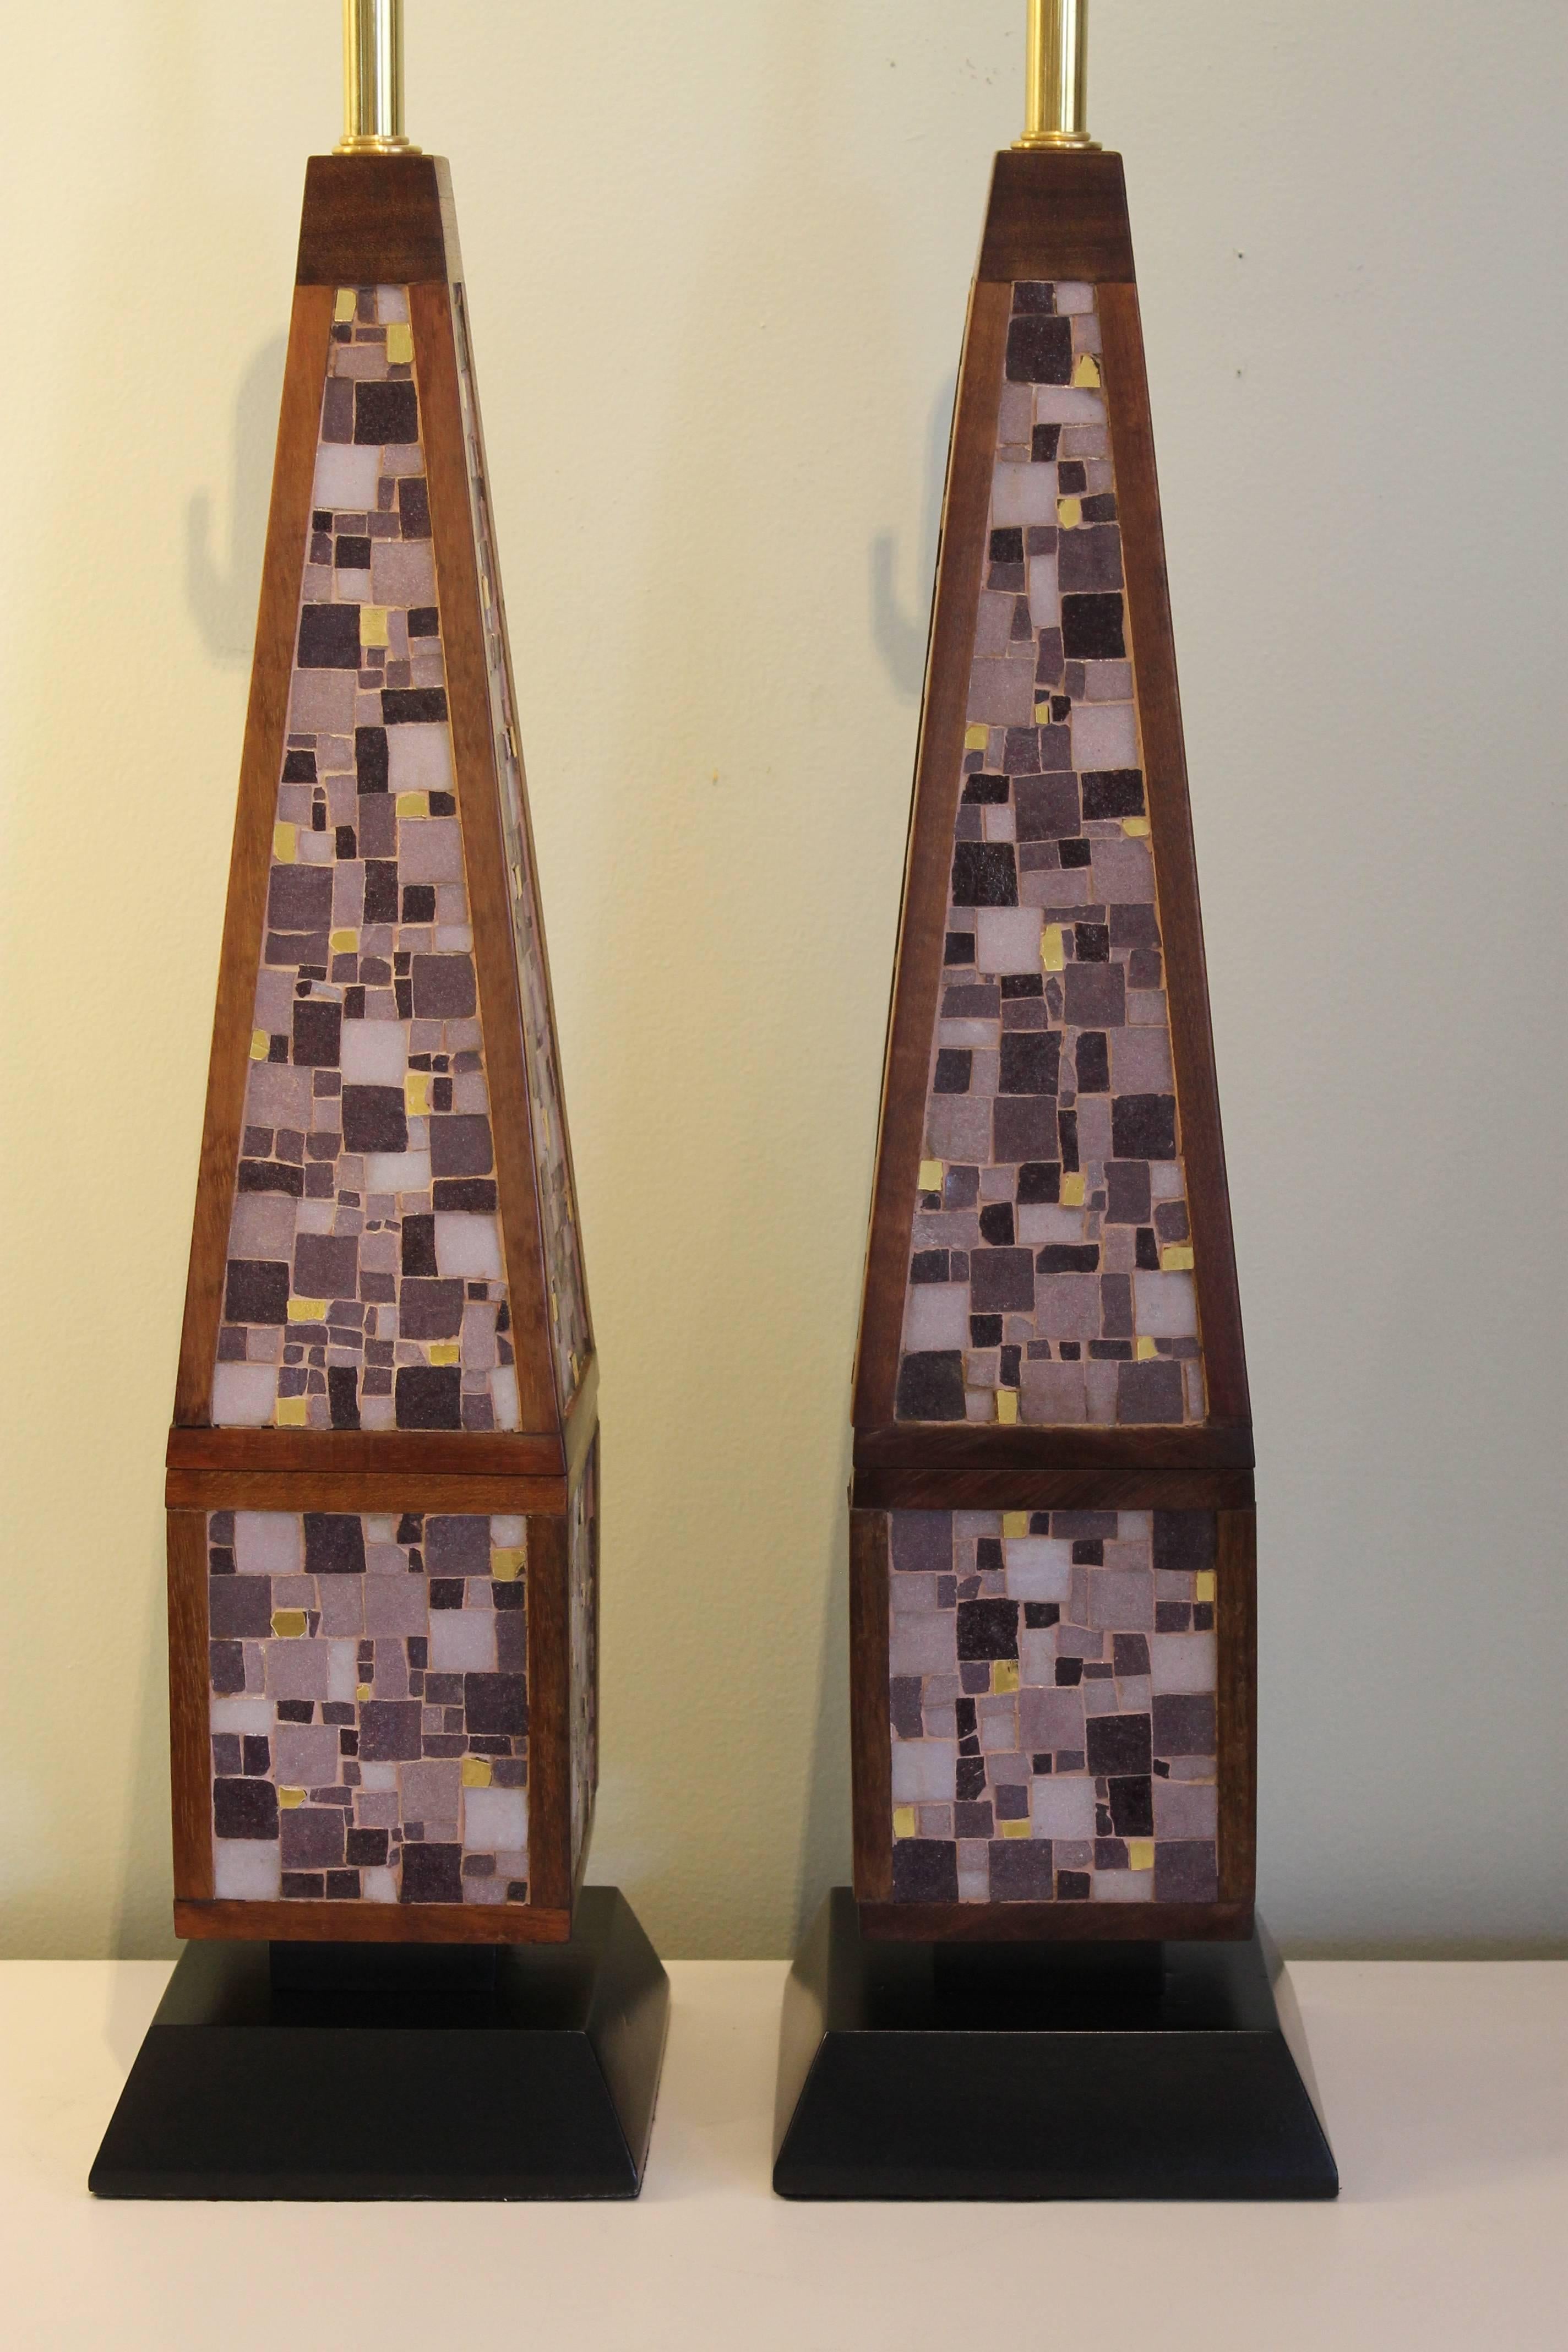 A matched pair of large solid mahogany obelisk shaped lamps inlaid with vitreous glass tiles. Tiles are all individually cut and laid by hand and are in soft shades of lavender with bright gold accents. Bases are black painted mahogany. These